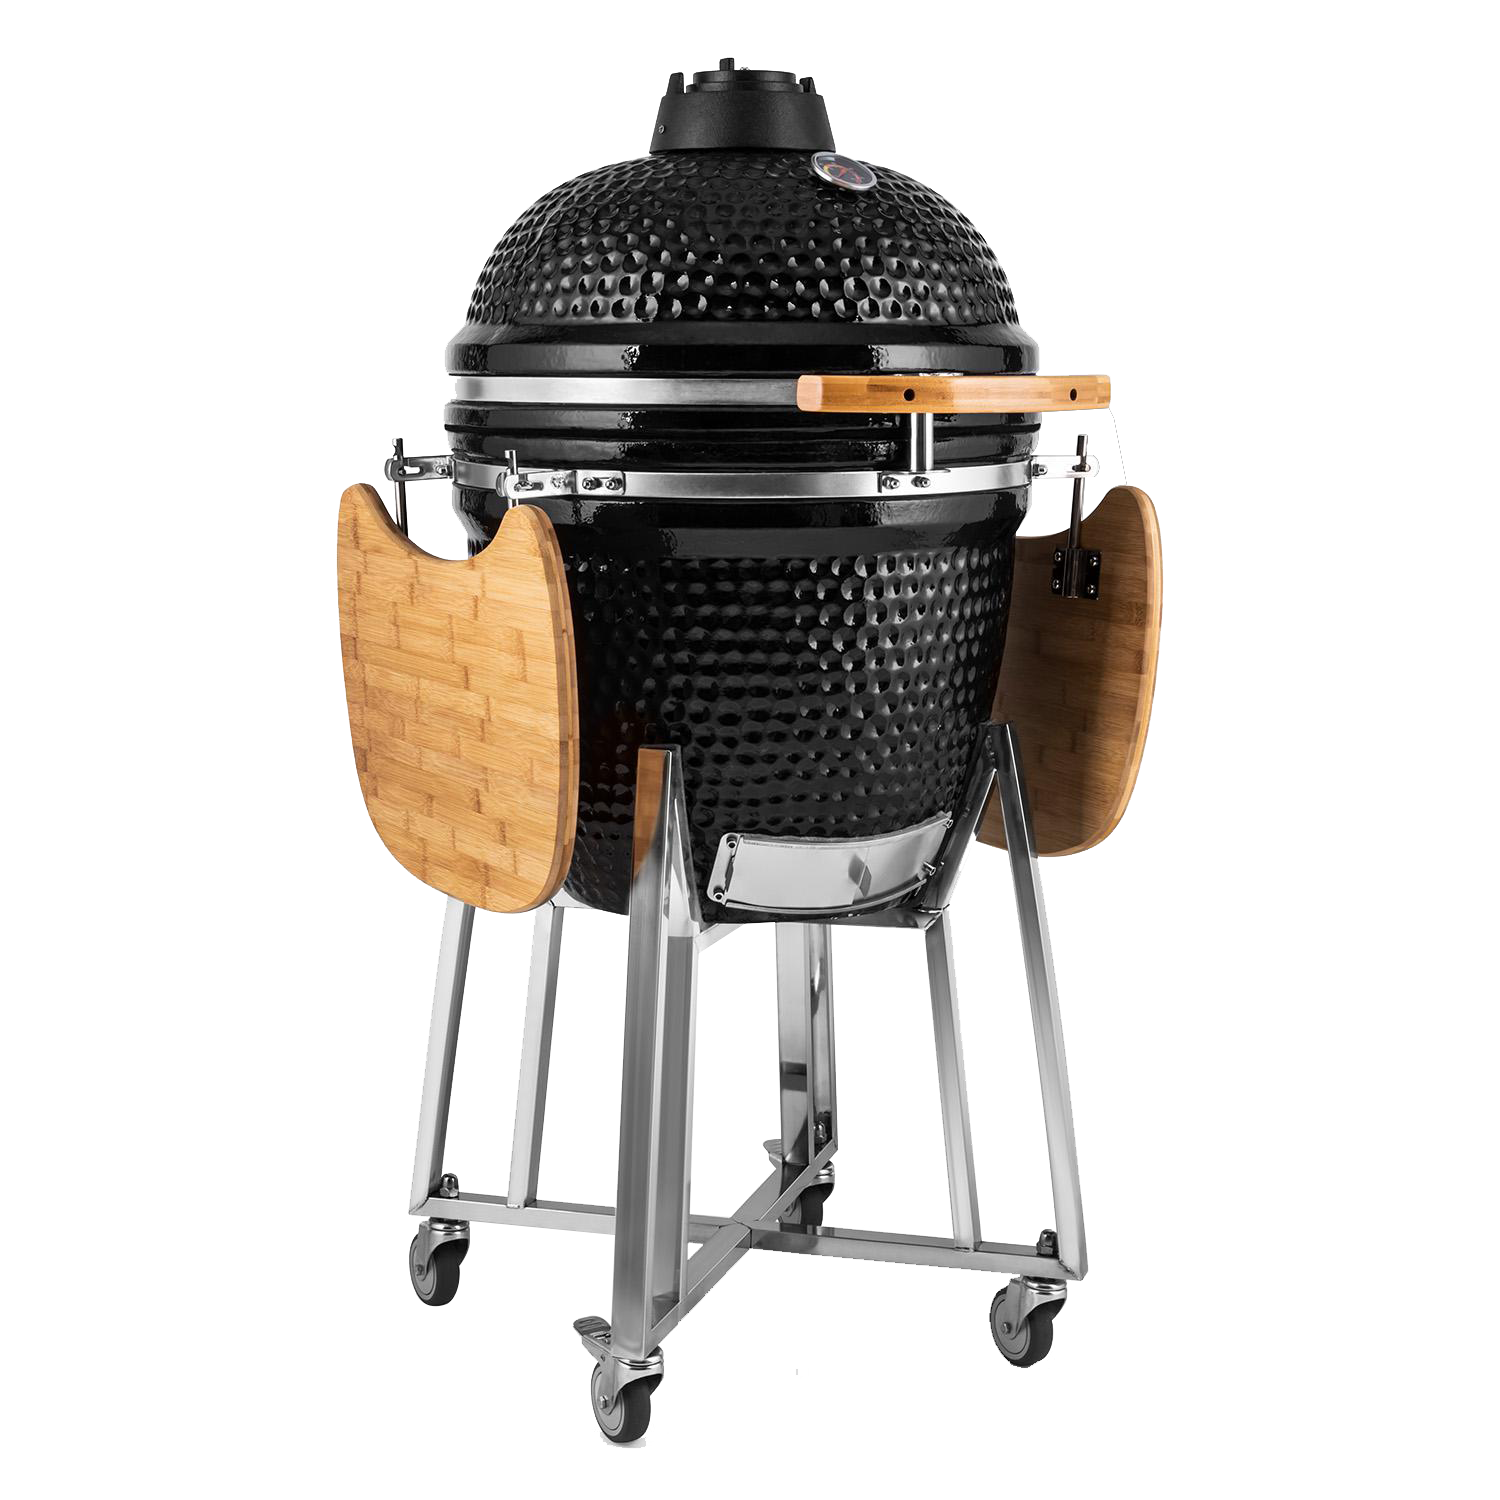 AUPLEX OEM Parrilla Kamado Grill Design Ceramic Outdoor barbecue 21Inch Charcoal Bbq Grills For Garden Featured Image